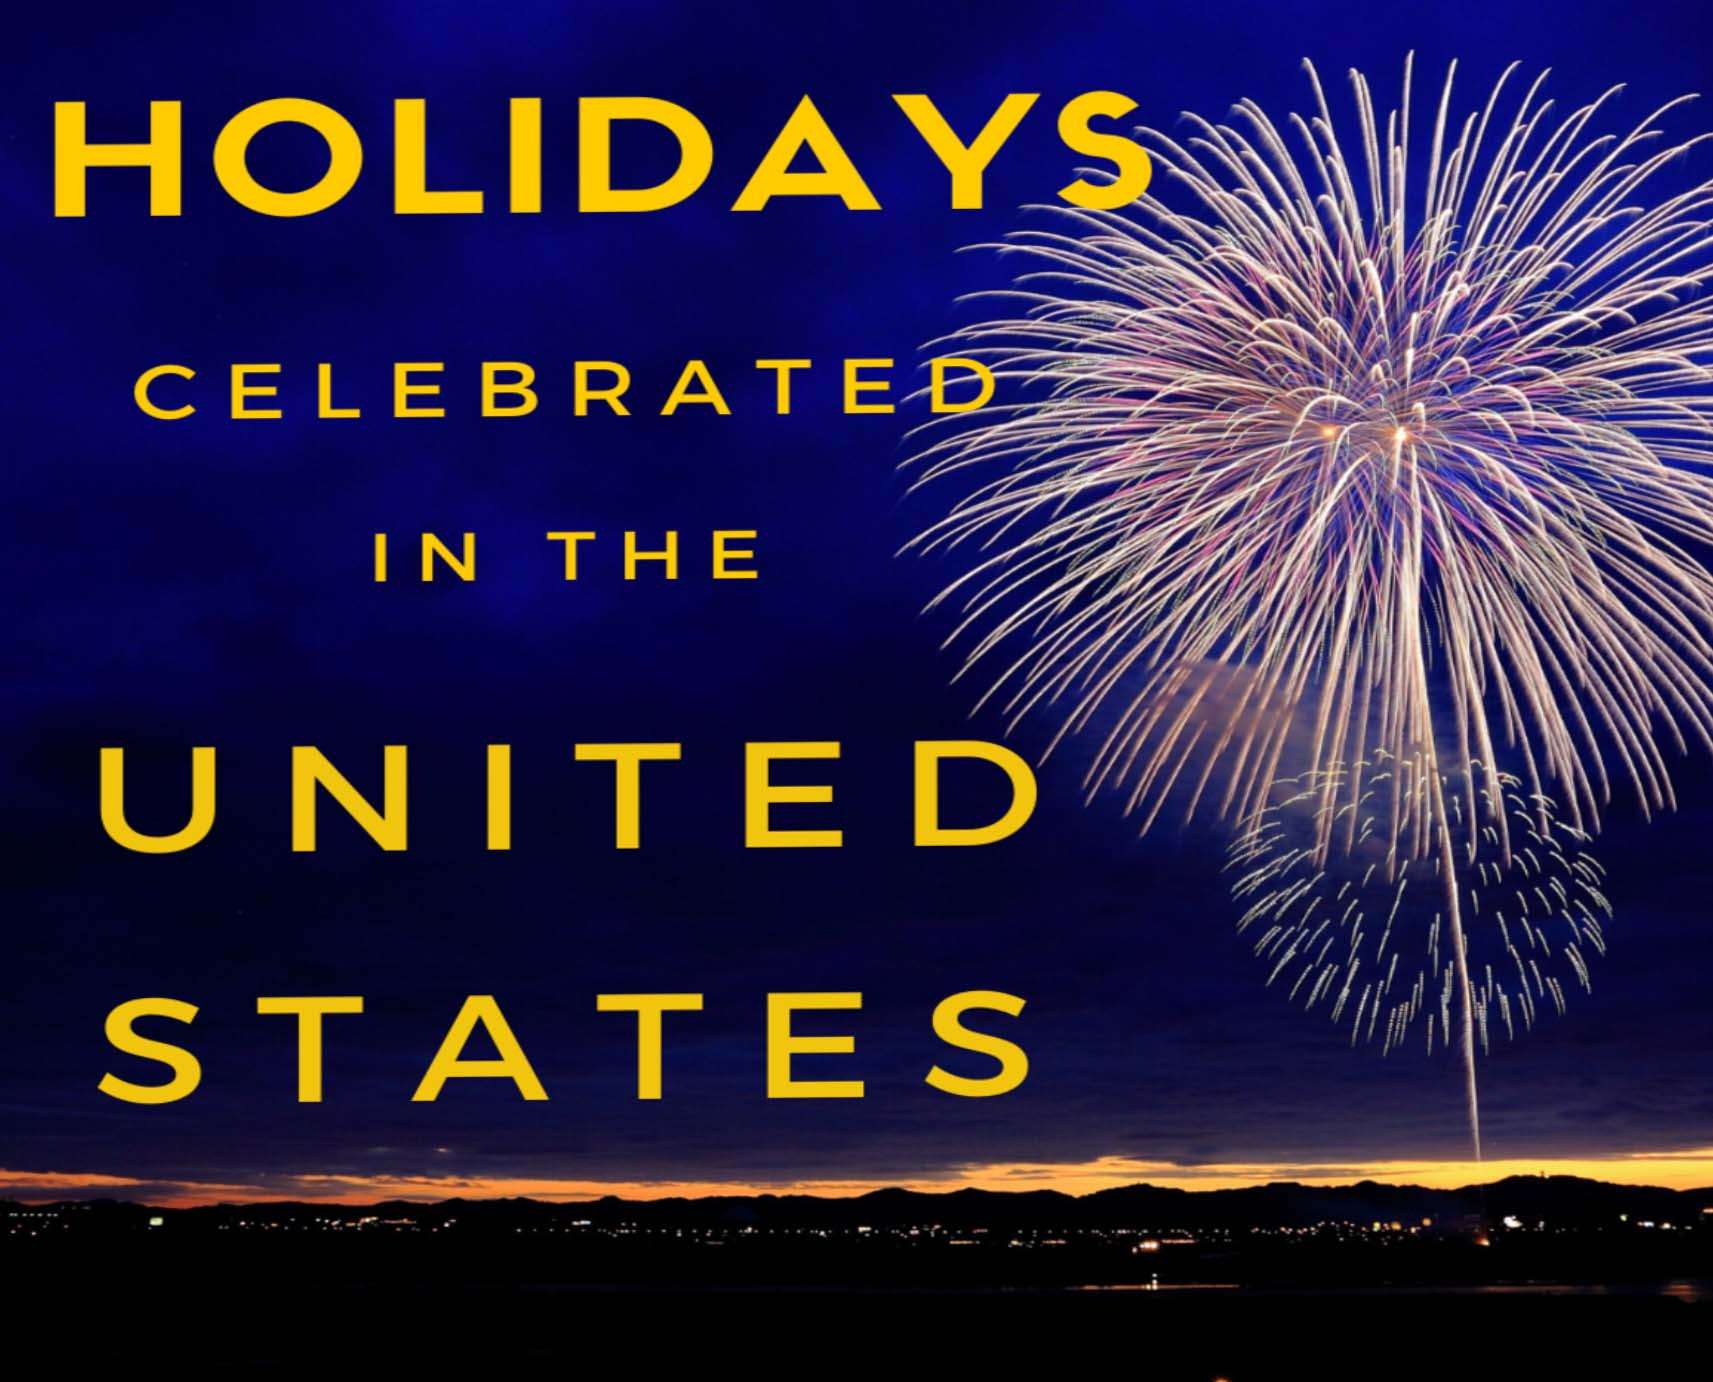 Best holiday event in United states in America 2022